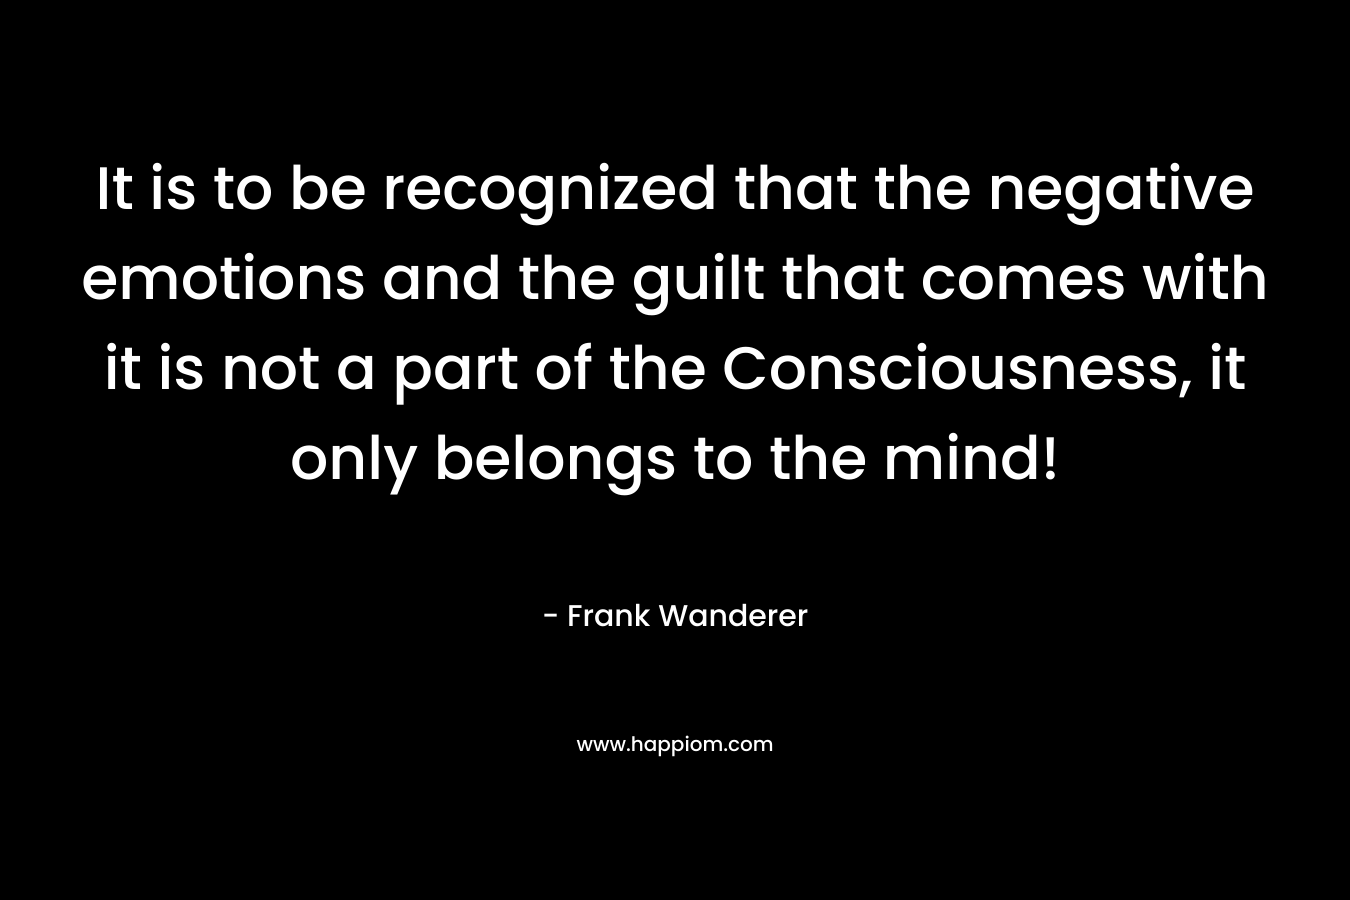 It is to be recognized that the negative emotions and the guilt that comes with it is not a part of the Consciousness, it only belongs to the mind! – Frank Wanderer